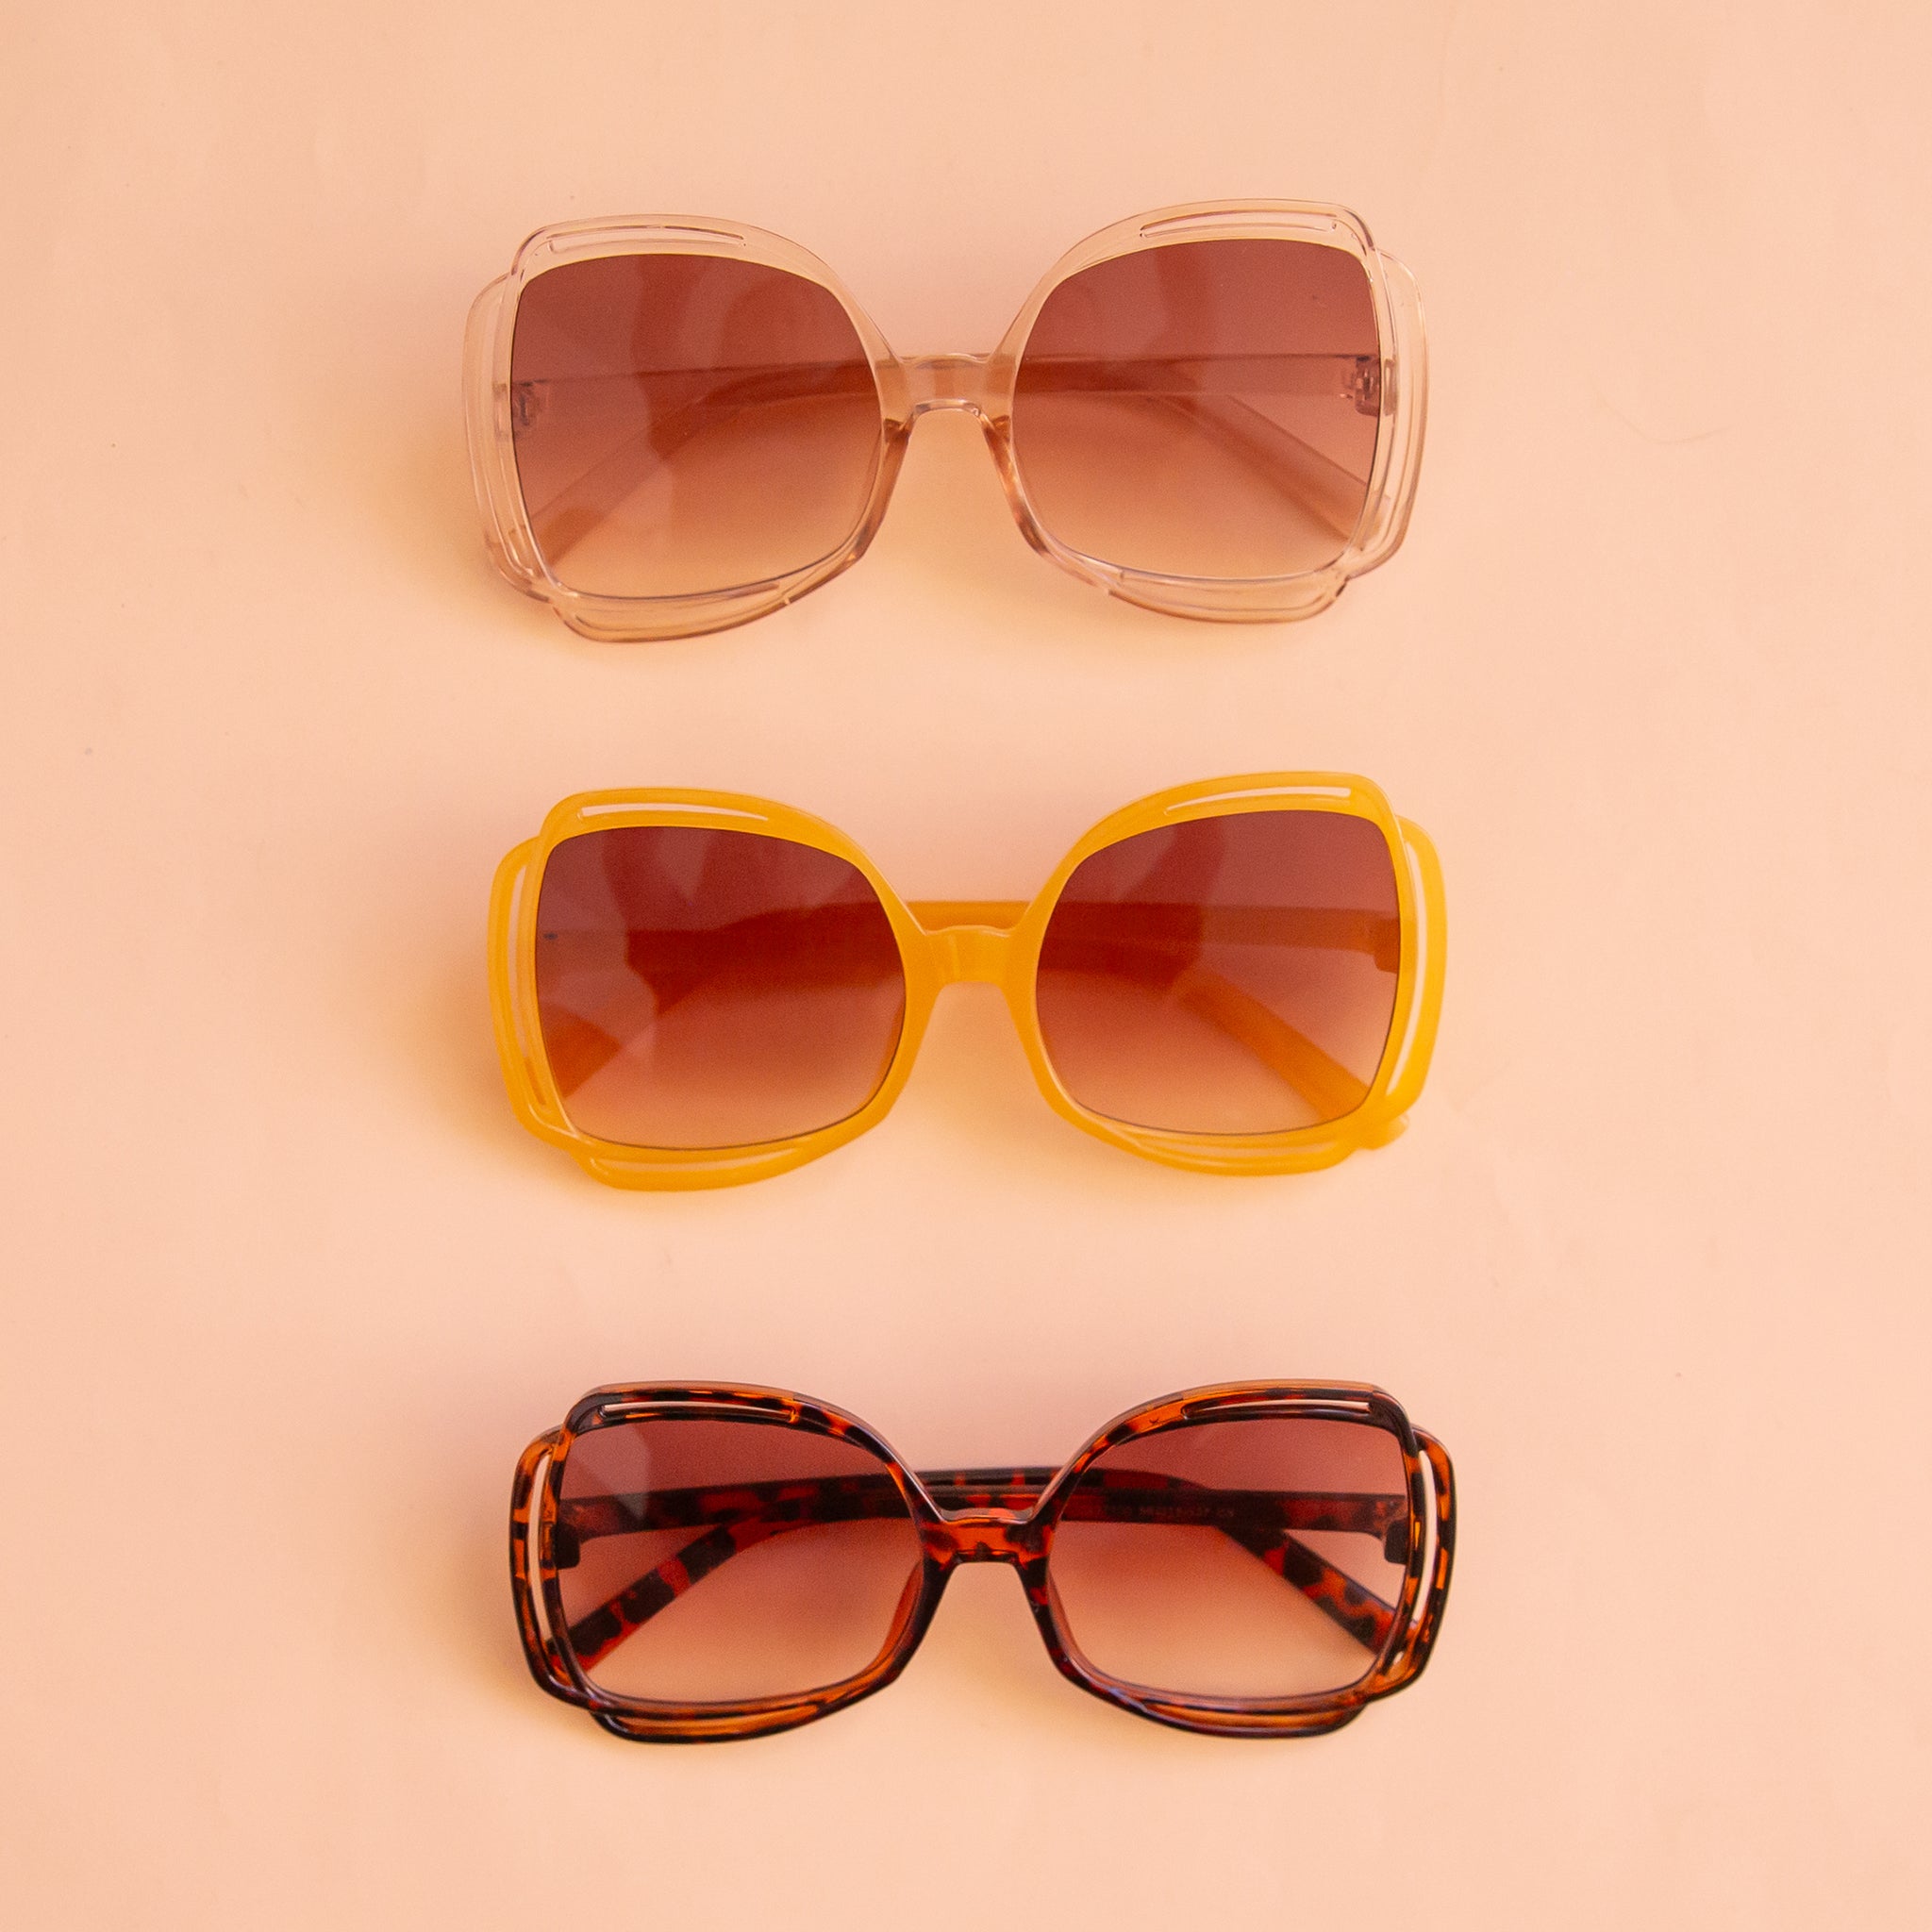 On a peachy background is a pair of tortoise sunglasses with a round frame and a brownish pink lens sitting next to the other two available color options.